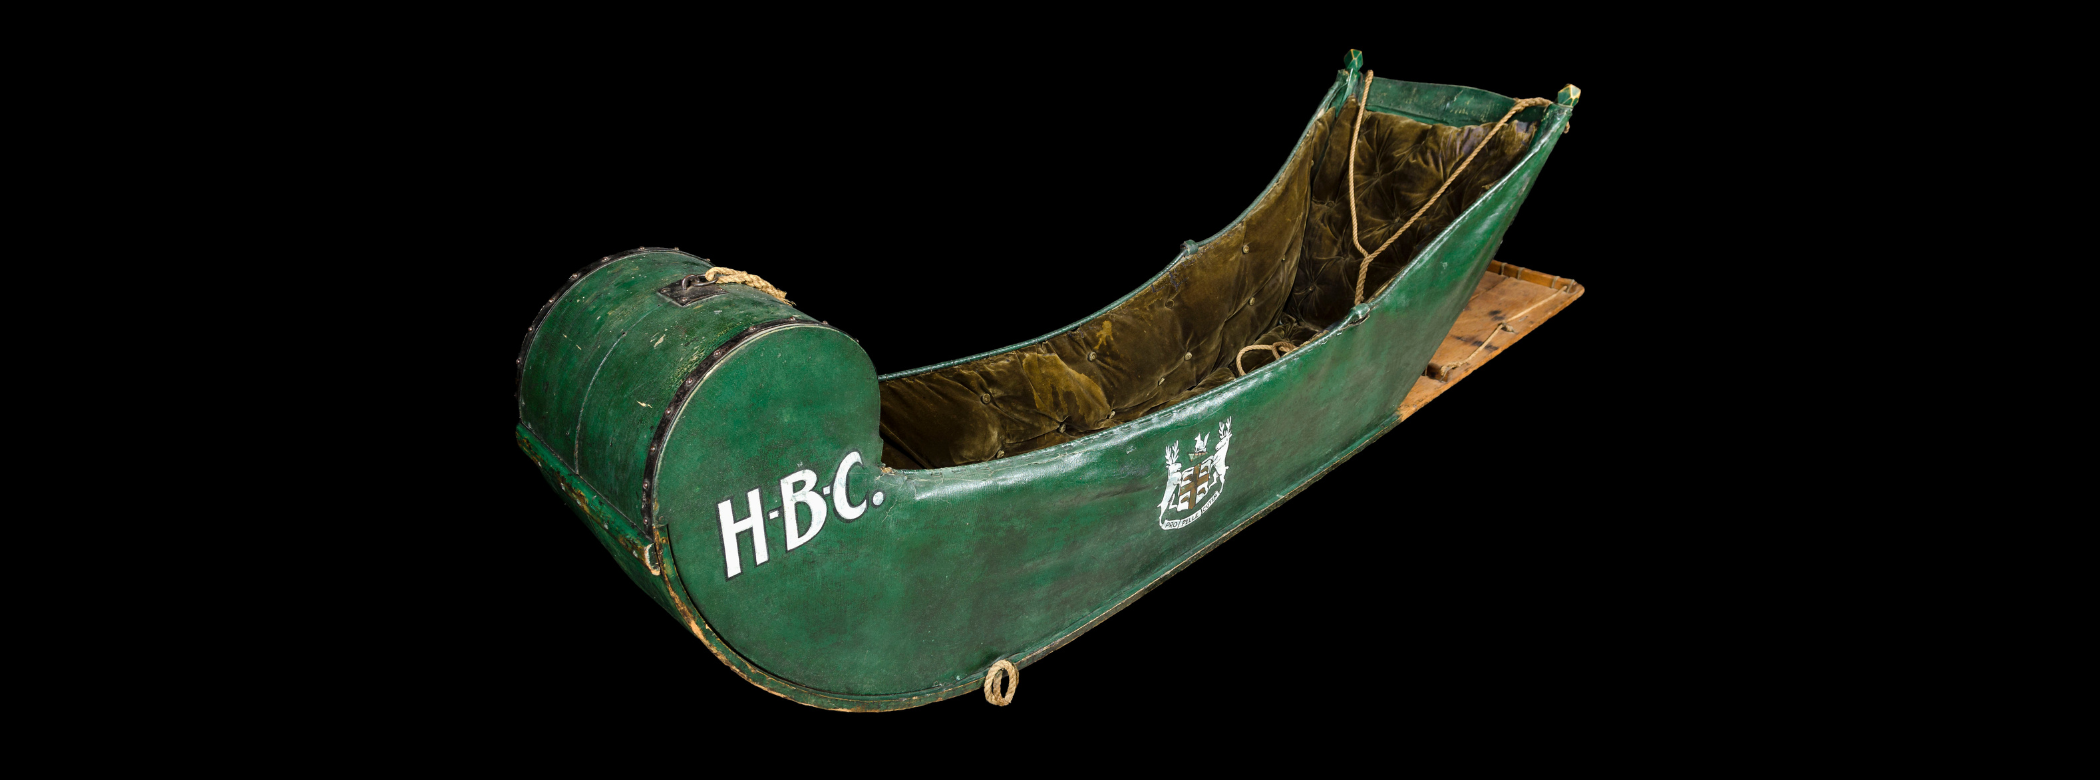 Sled (called a cariole) covered with green painted canvas and interior lined with plush olive-green velvet. The letters HBC are painted in white on the curved front, and the Company’s Coat-of-Arms painted on the side in white and red. The Coat-of-Arms features two elk flanking a crest with St. George’s cross in red and four little beavers in each quadrant, topped with a fox sitting on a cap, and a banner with their Latin motto Pro Pelle Cutem scrolled along the bottom.